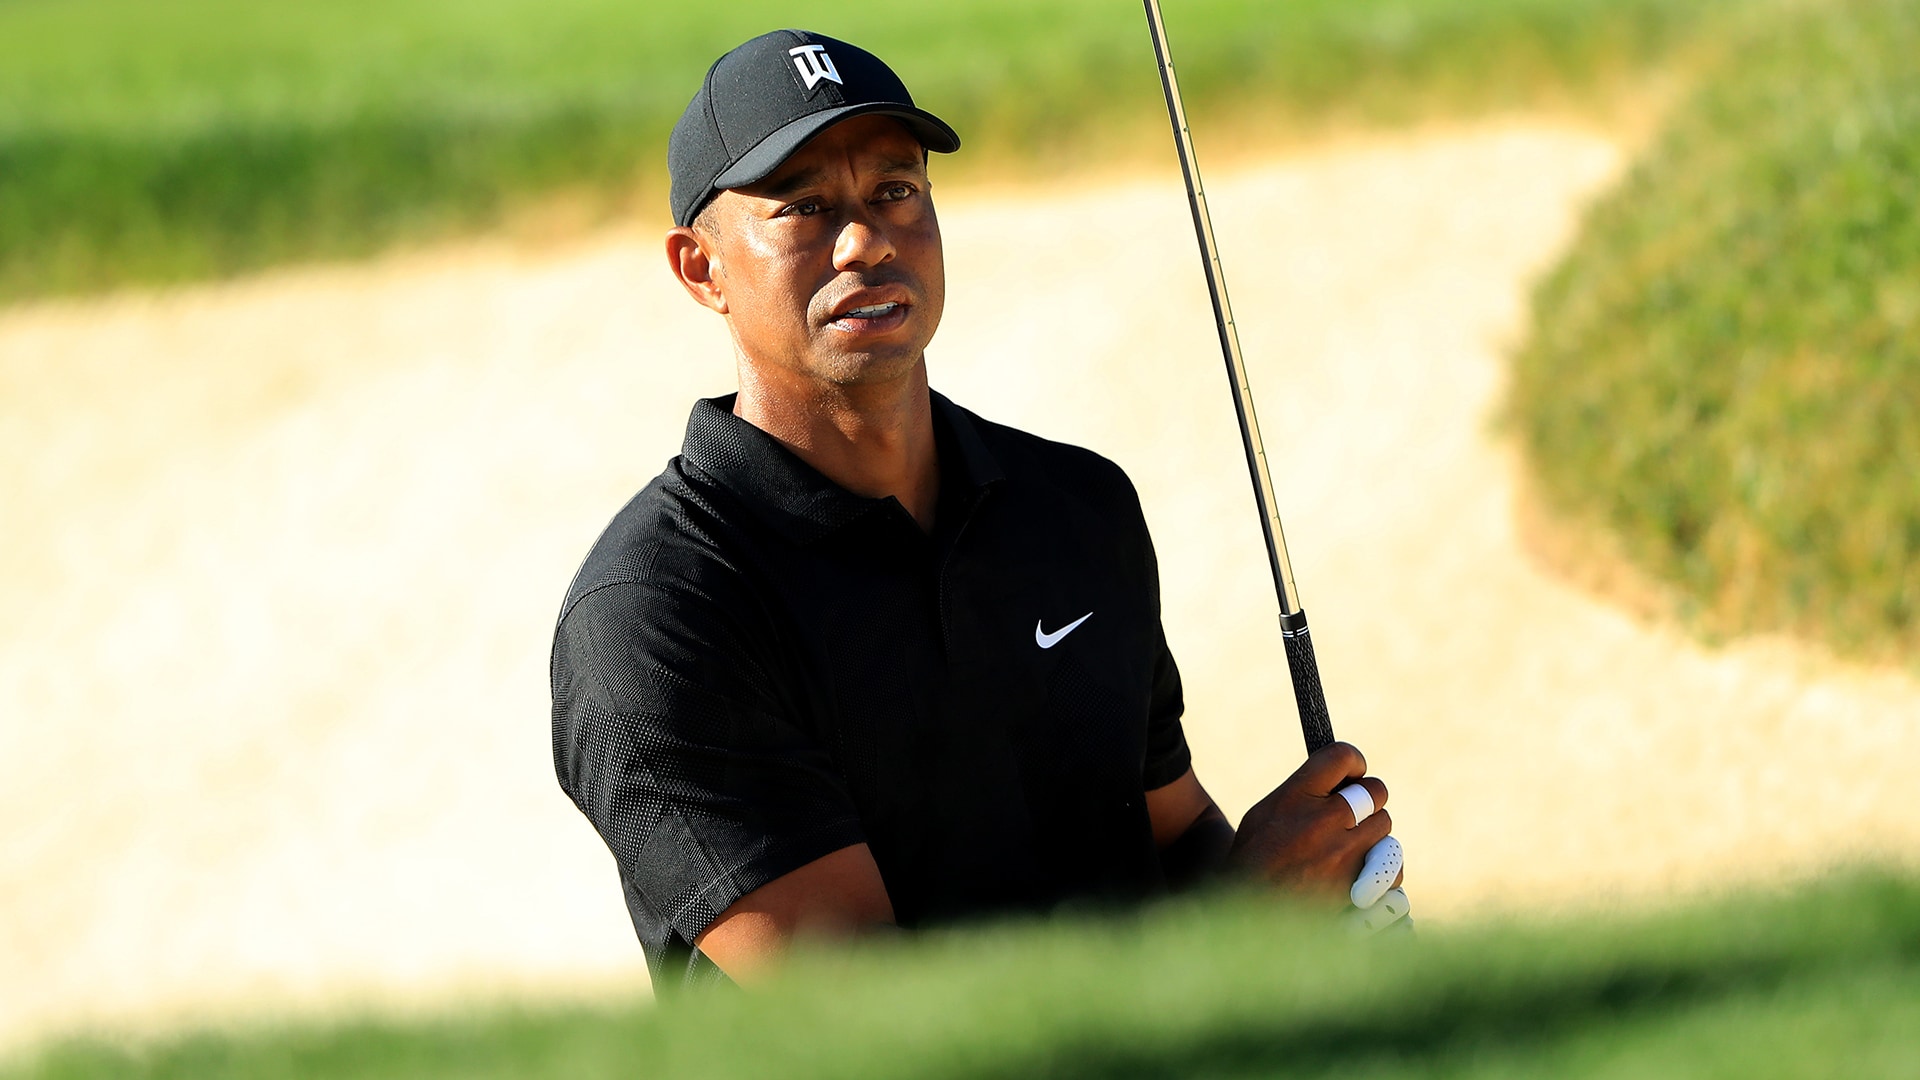 Tiger Woods: Change is how we grow as a society, but not at cost of innocent lives